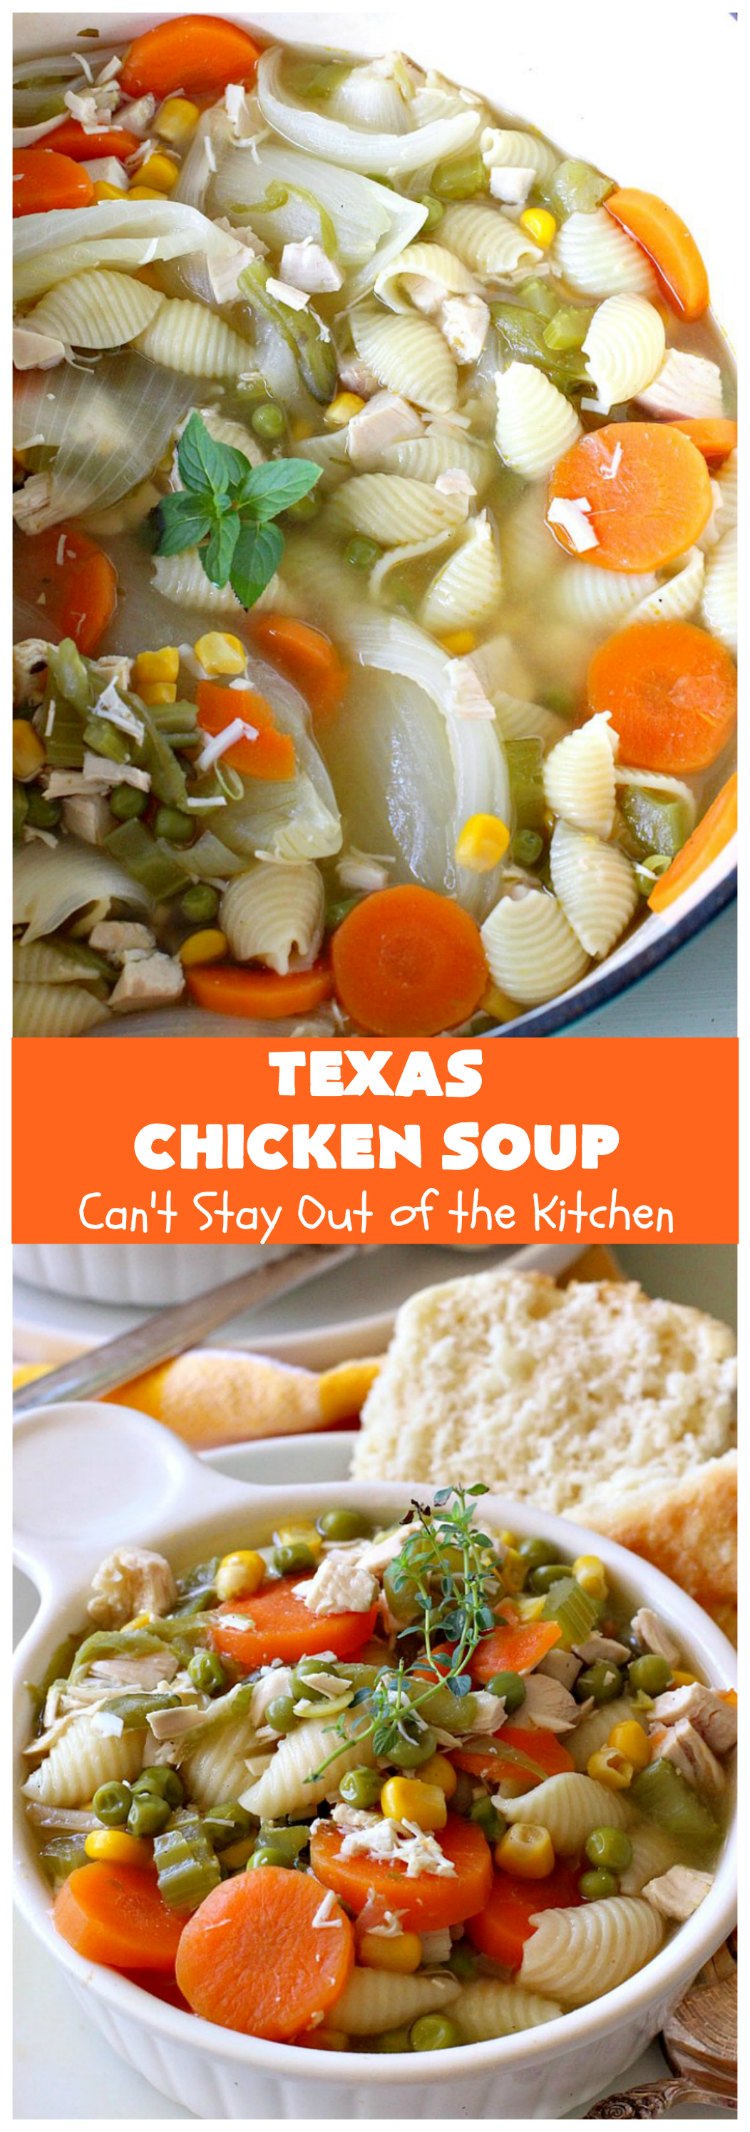 Texas Chicken Soup | Can't Stay Out of the Kitchen